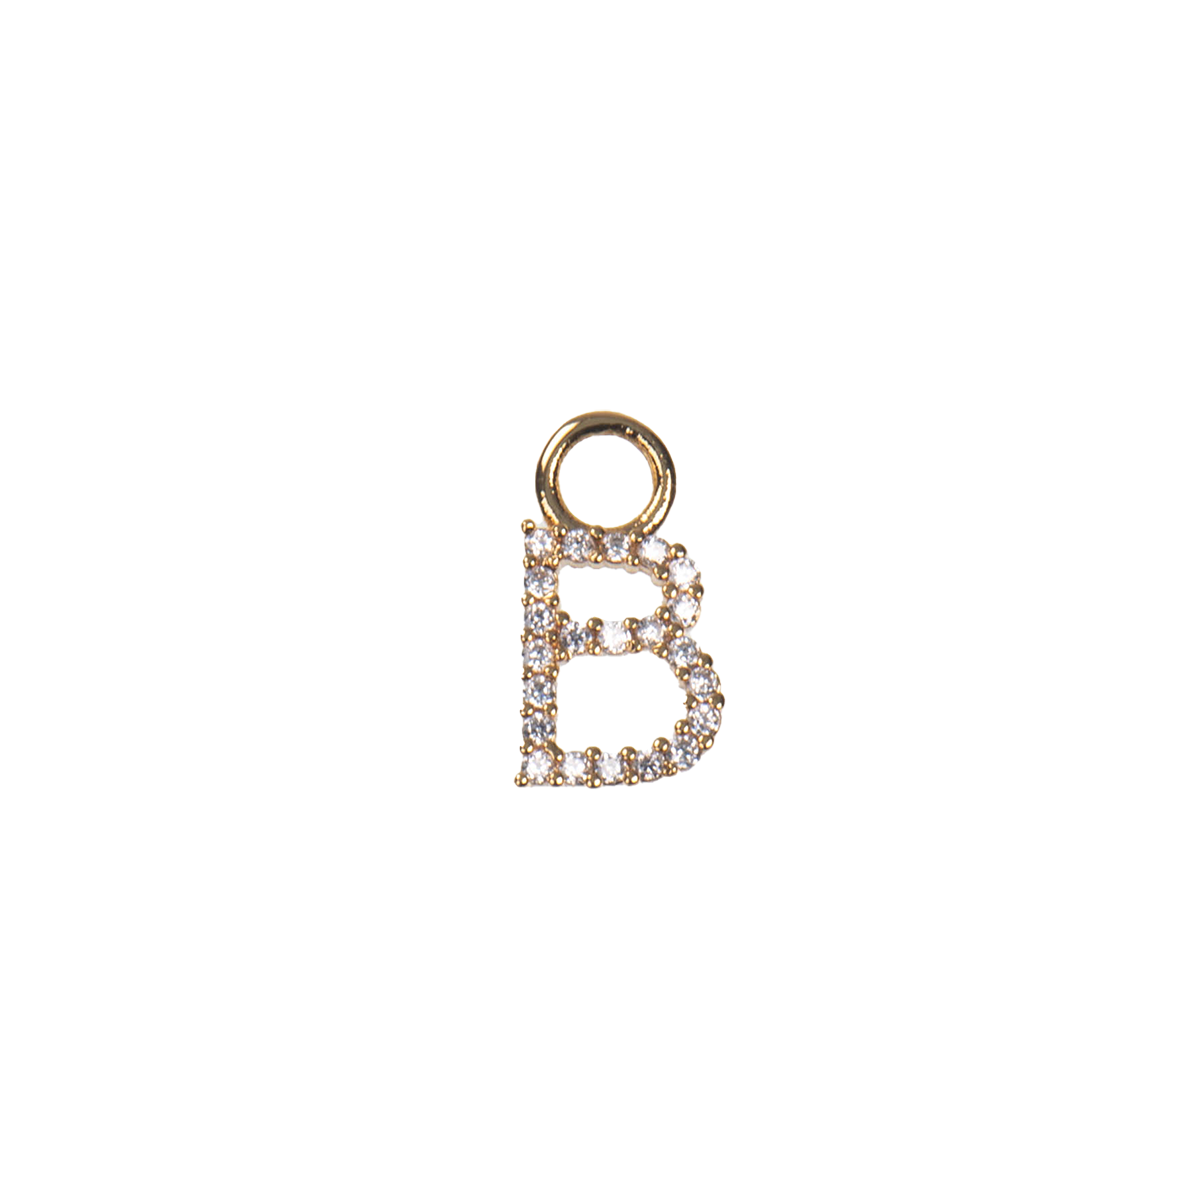 Image of Letter charm B from Emilia by Bon Dep